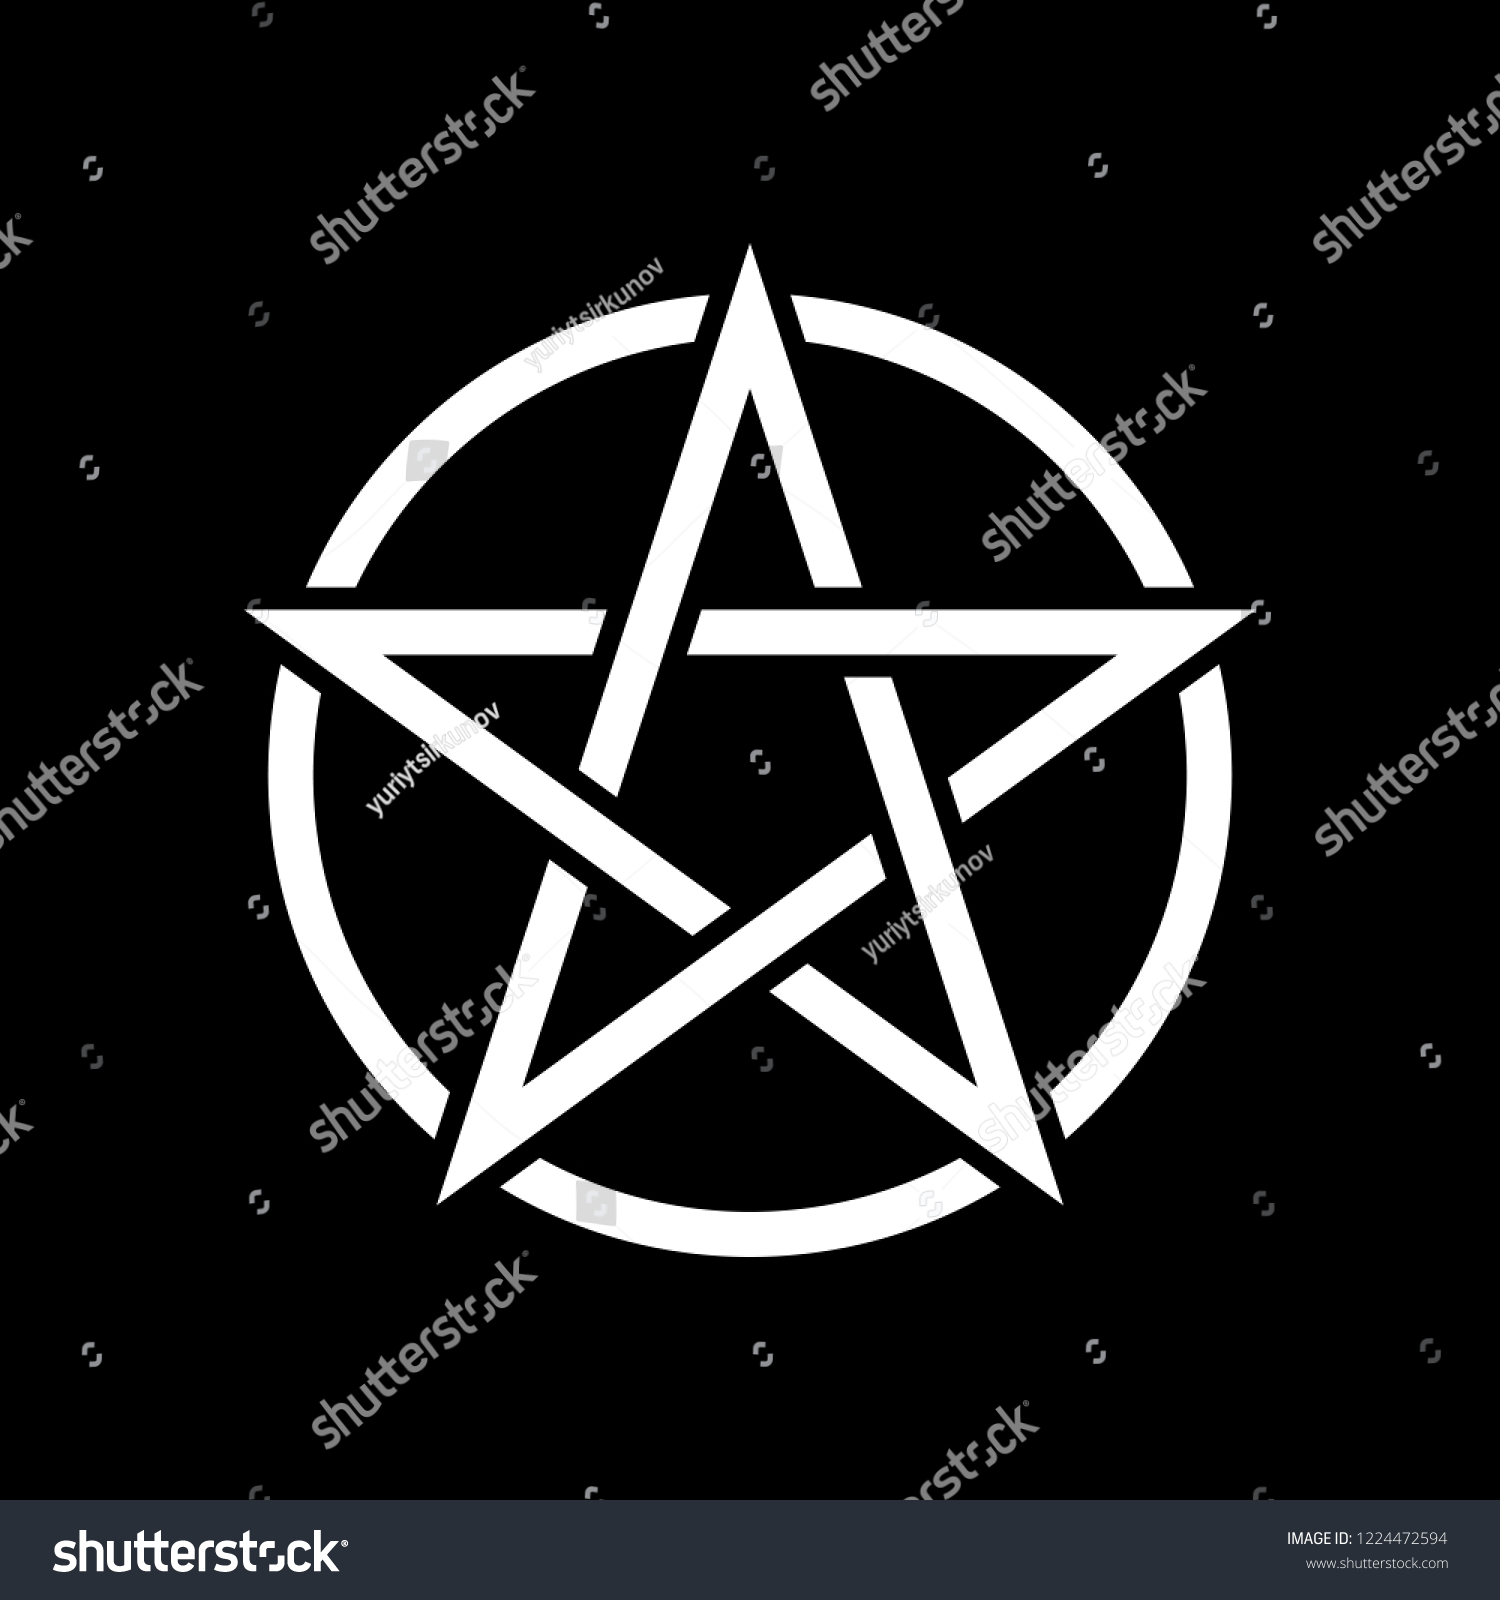 Pentacle Magic Sign Black Background Vector Stock Royalty